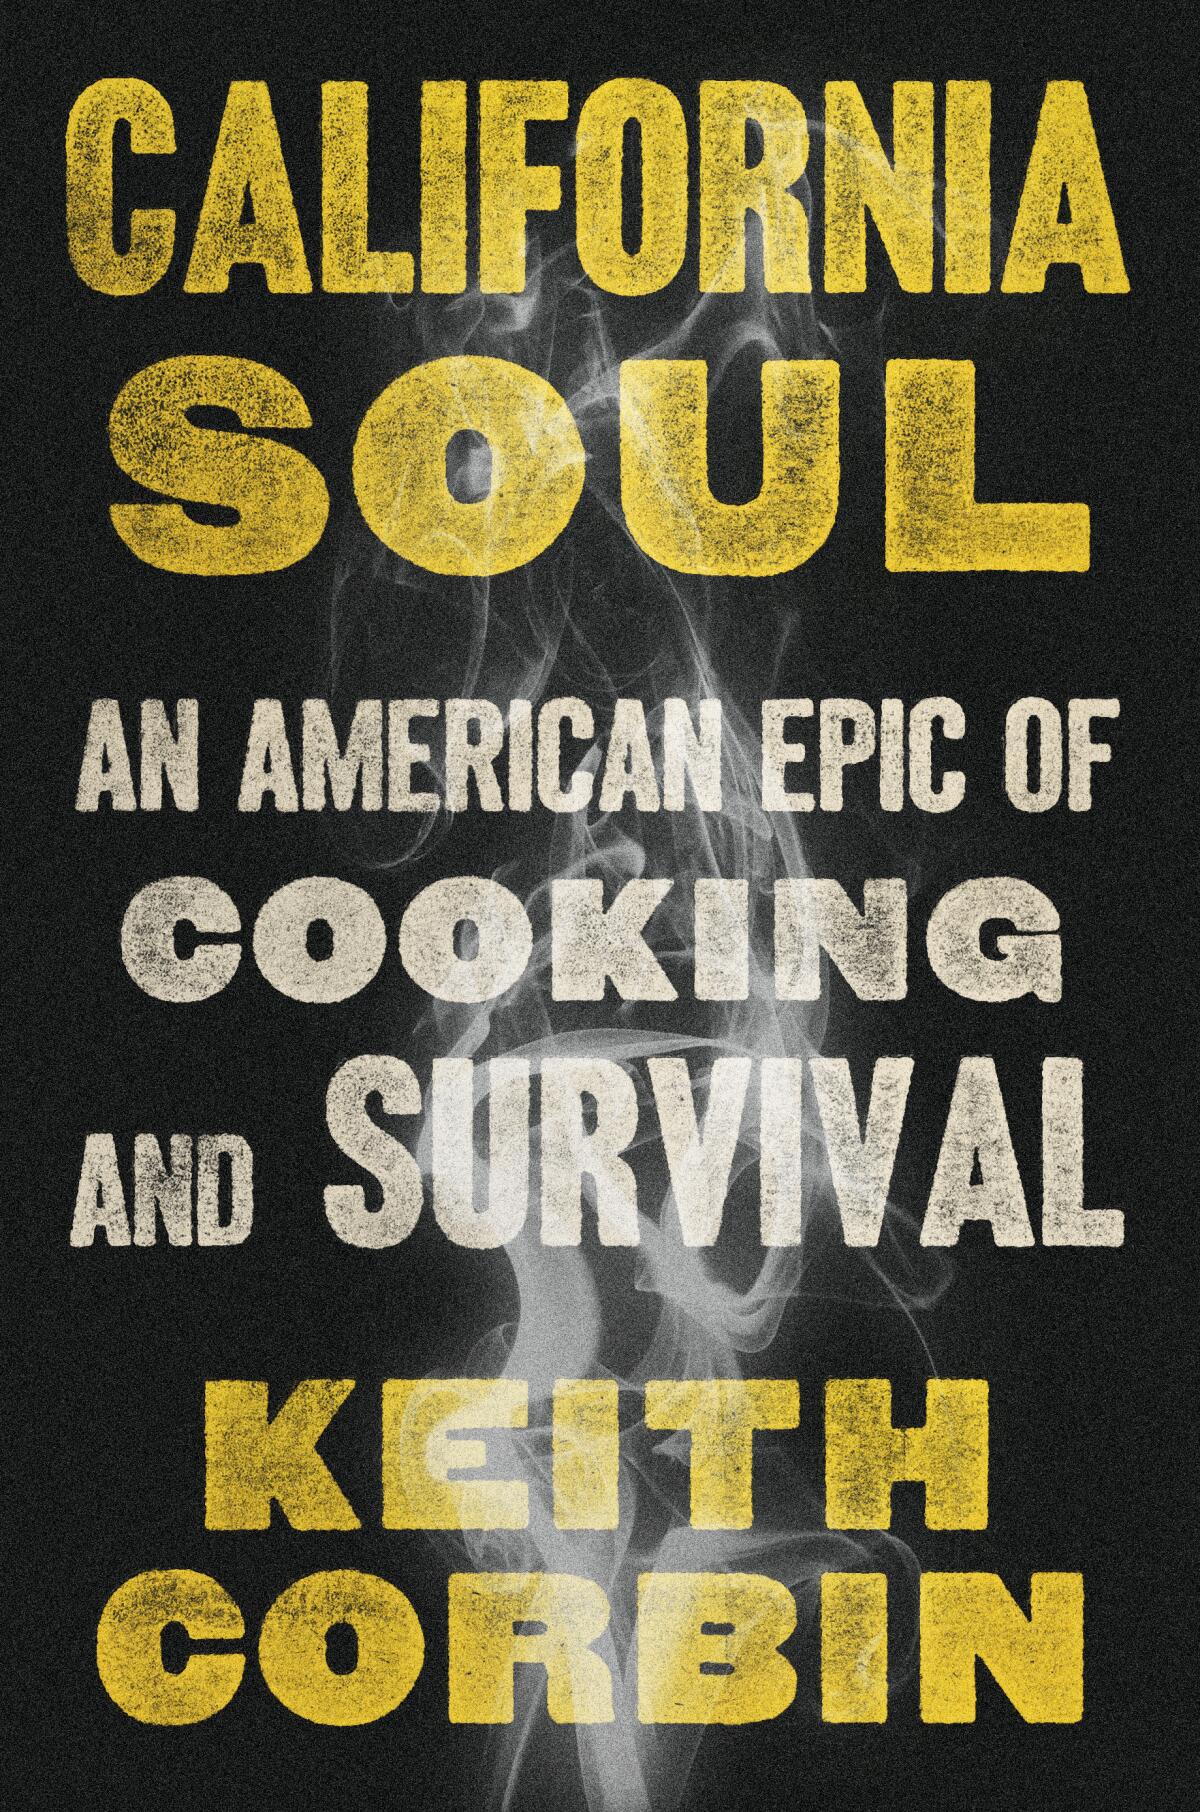 Book cover for "California Soul" by Los Angeles Chef Keith Corbin.